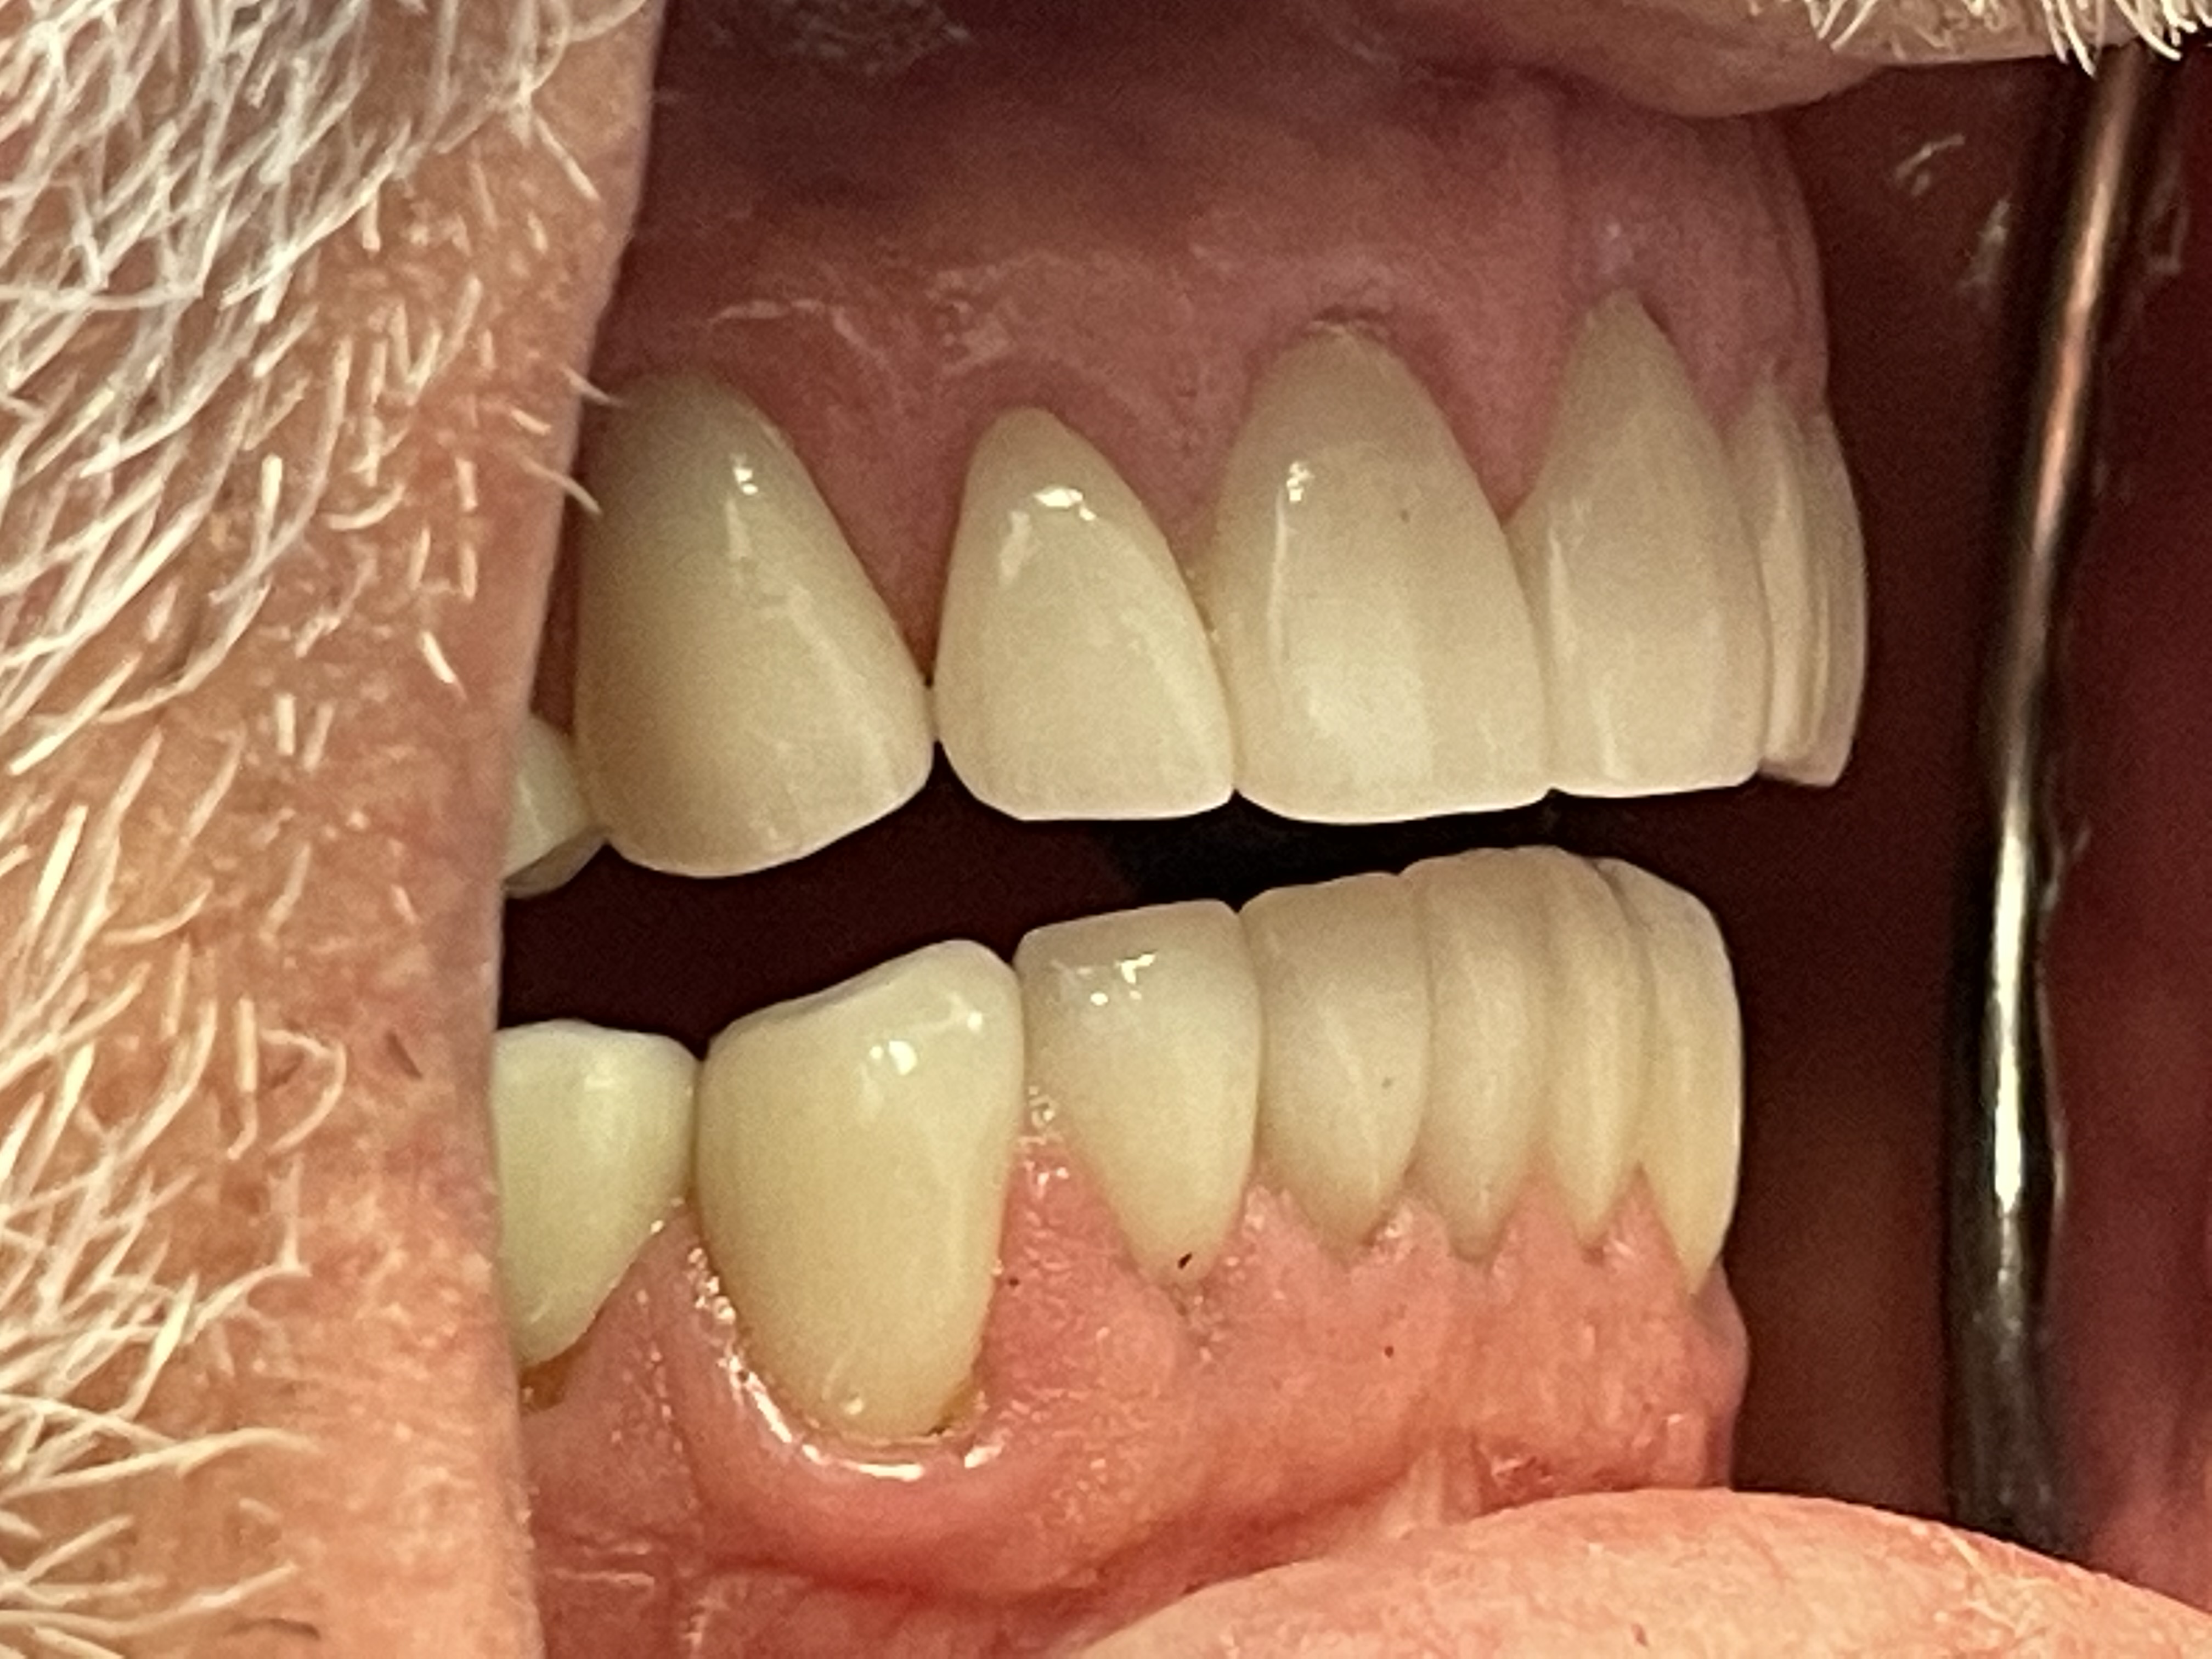 Patient requested a full mouth restoration. | Pro-Craft